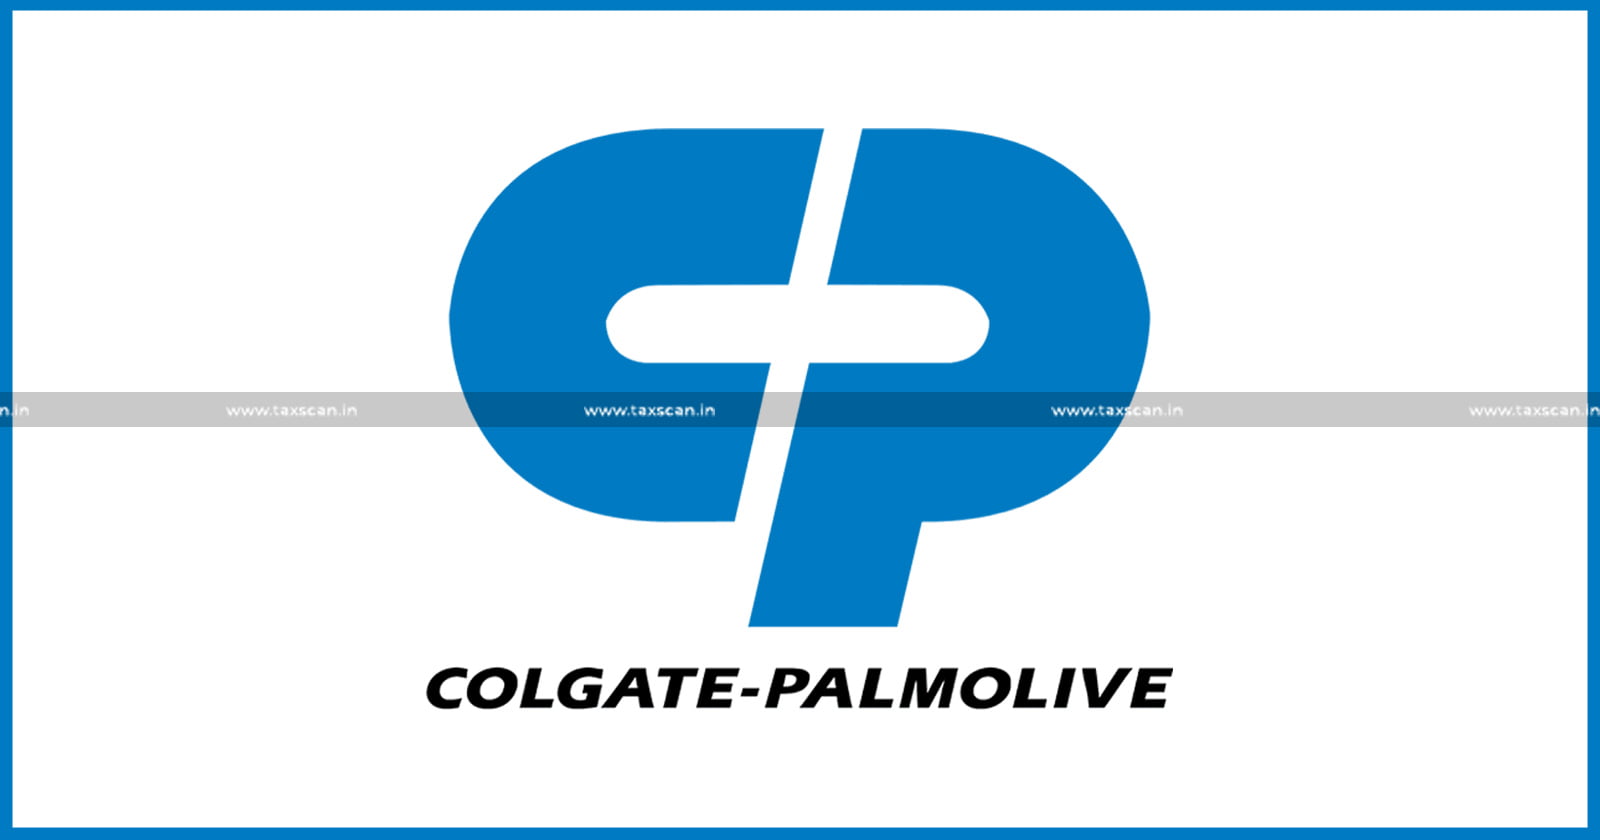 Payment Received by Colgate Palmolive Malaysia from Colgate India - Colgate Palmolive Malaysia - Colgate - Colgate India - Bombay High Court - Taxscan